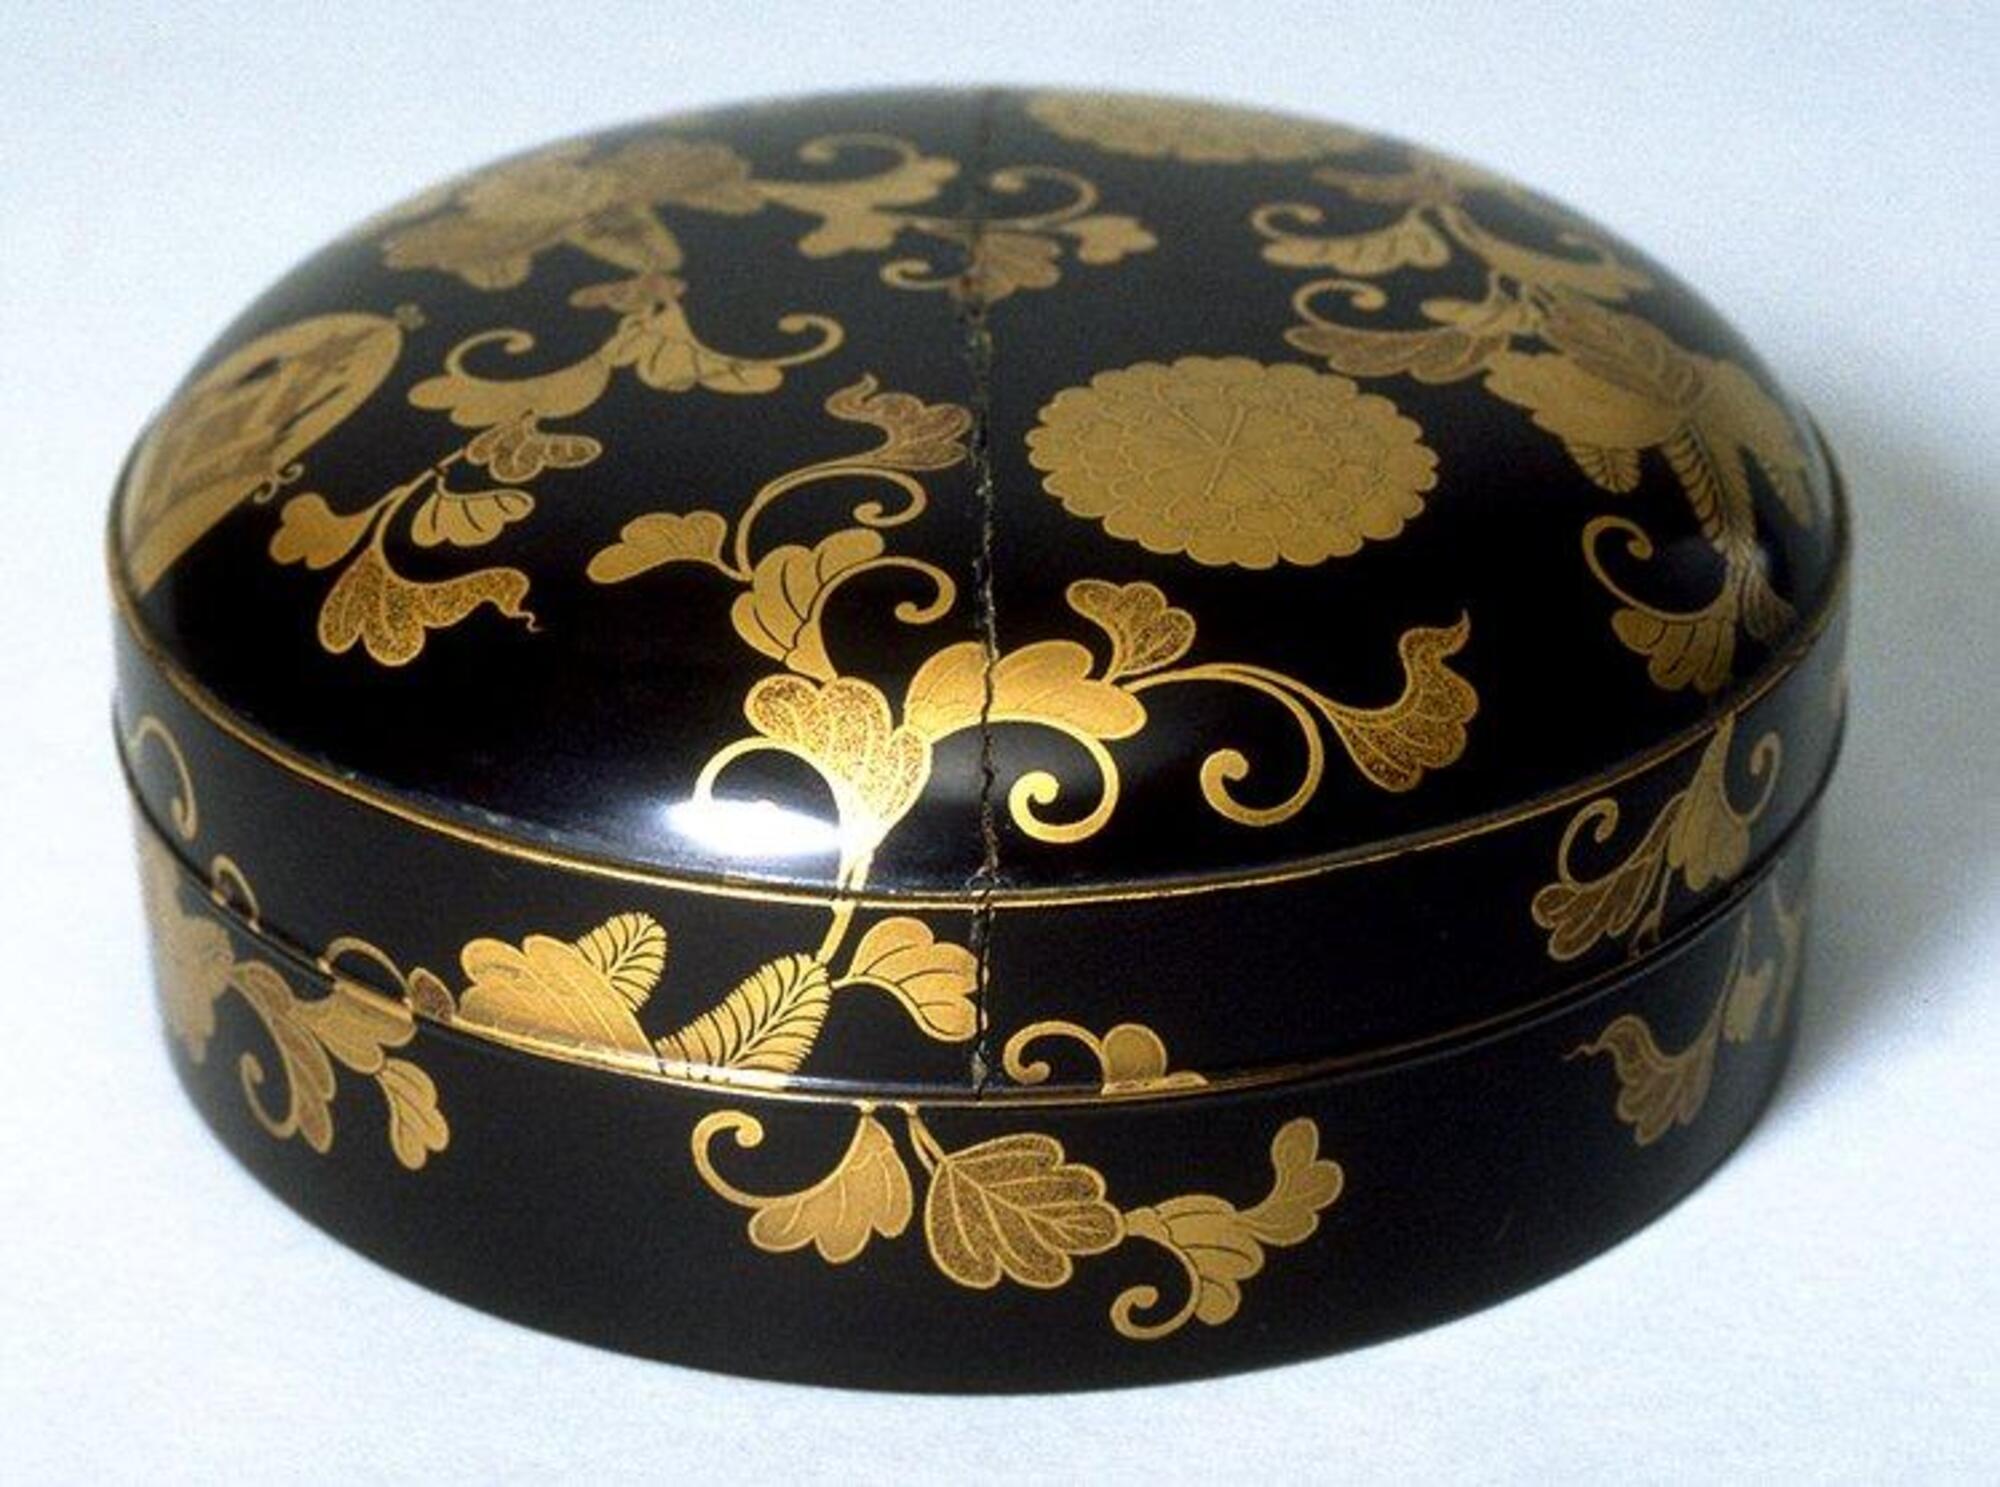 A short, round container lacquered with gold floral patterns wrapping around the entire container. A small crysanthemum crest and geometric crests, also in gold, appear on the rounded top of the container. Part of a bridal trousseau.